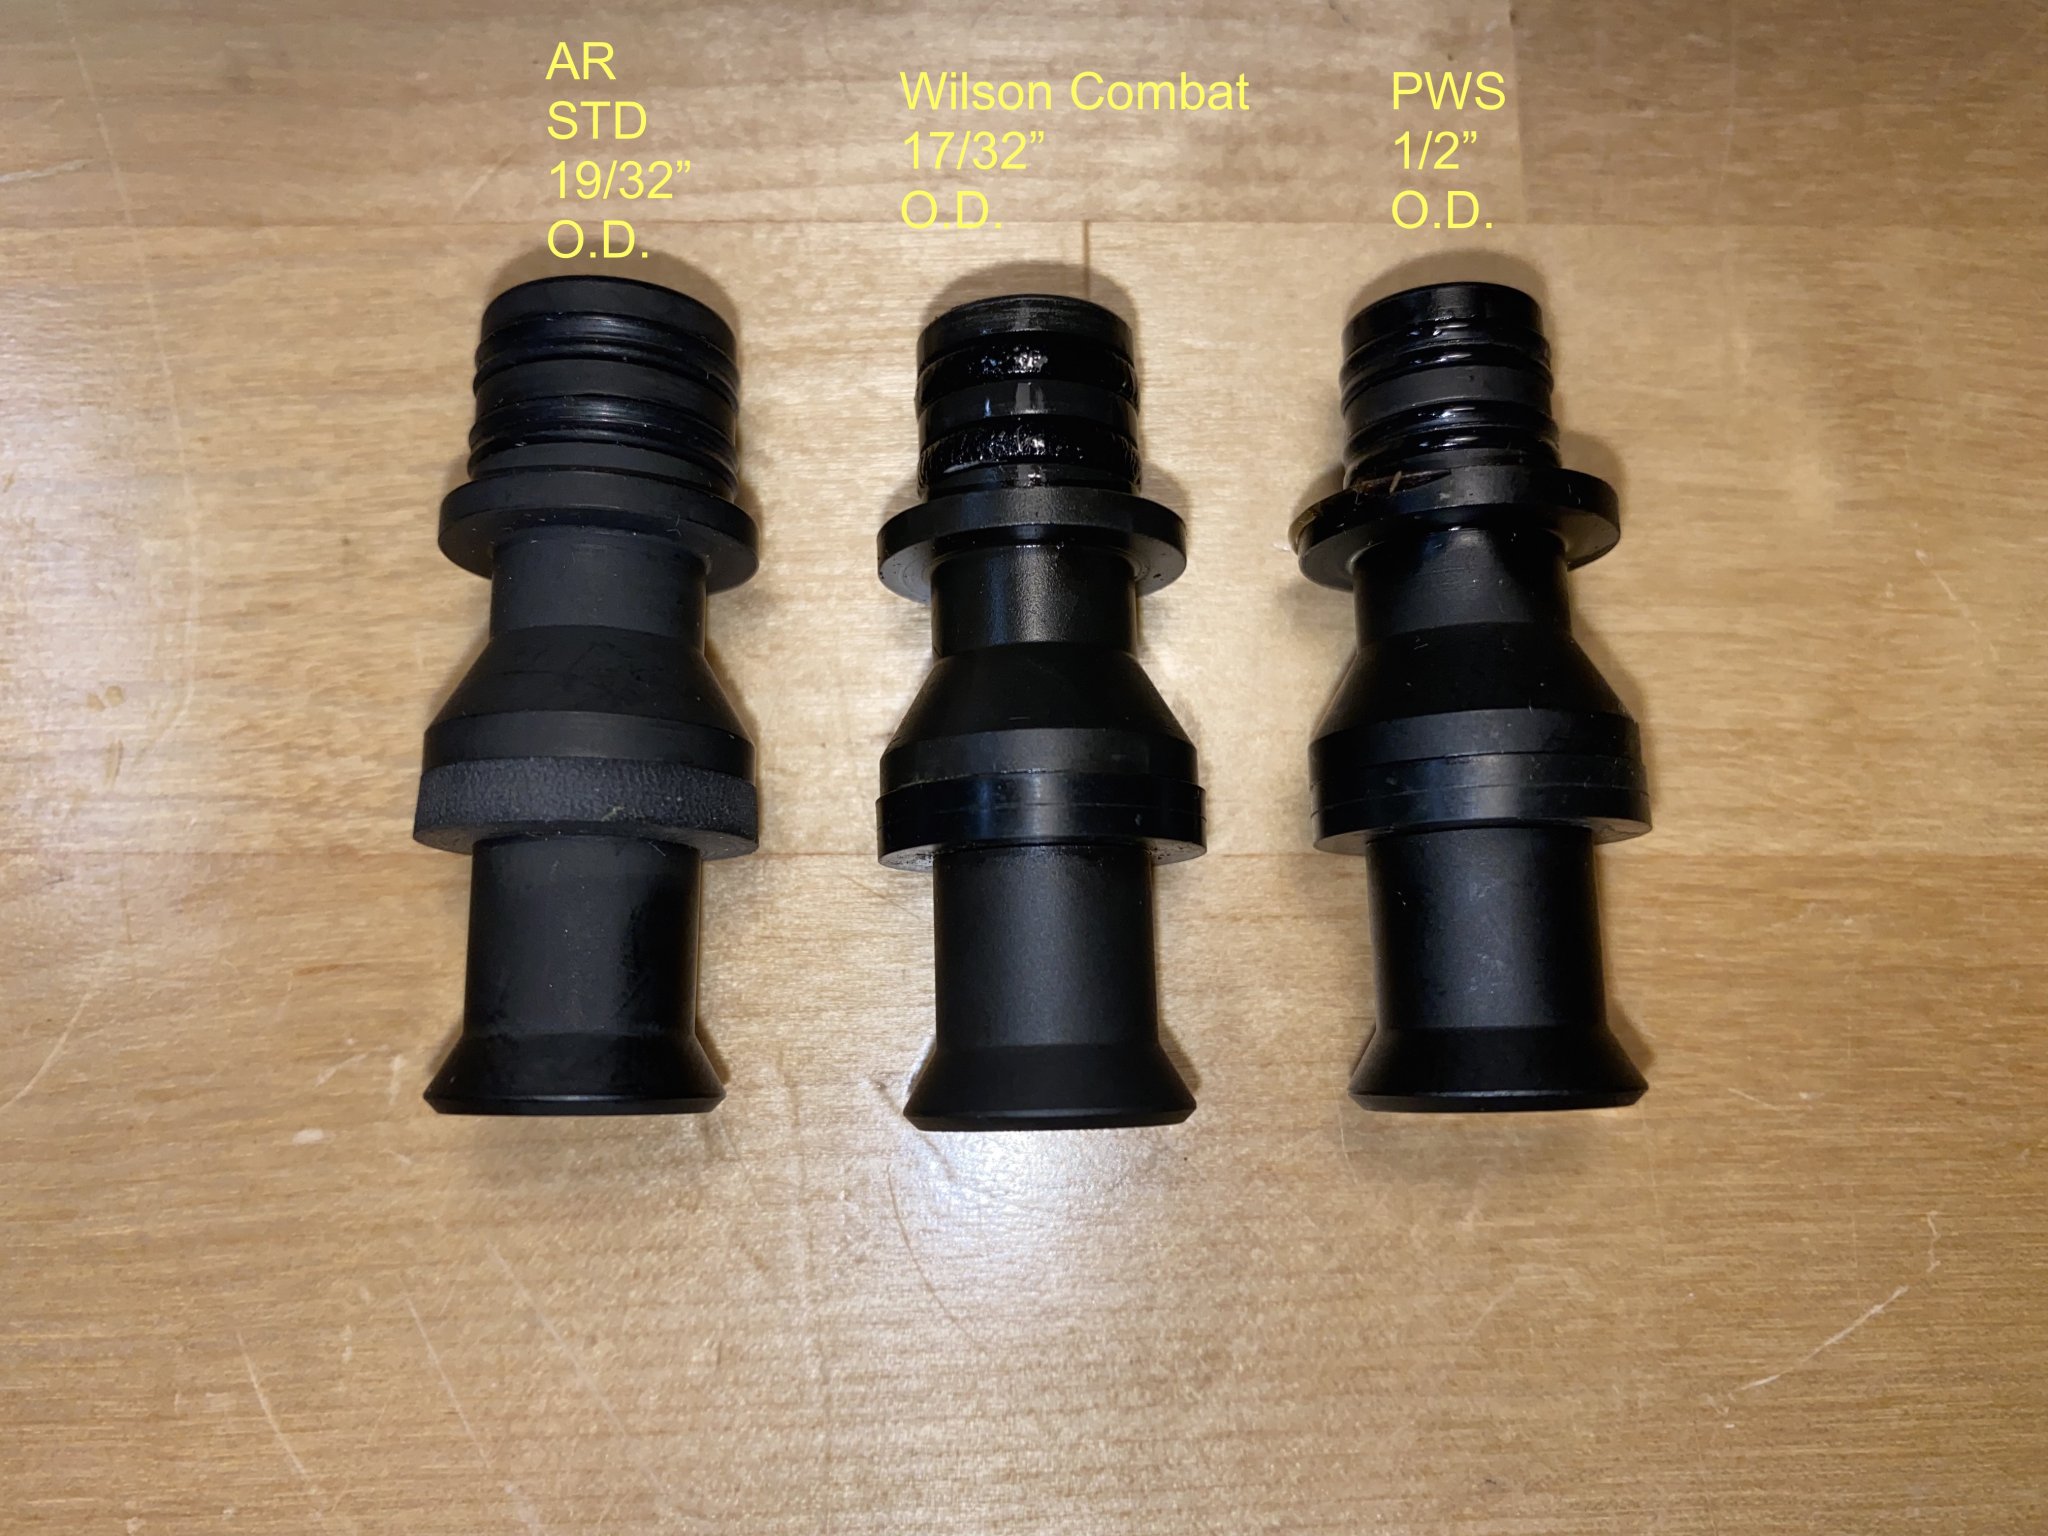 IMG_3790LAW TACTICAL GEN 3 M VARIOUS SIZE BOLT ADAPTERS PWS WILSON AR9 STANDARD copy.jpg